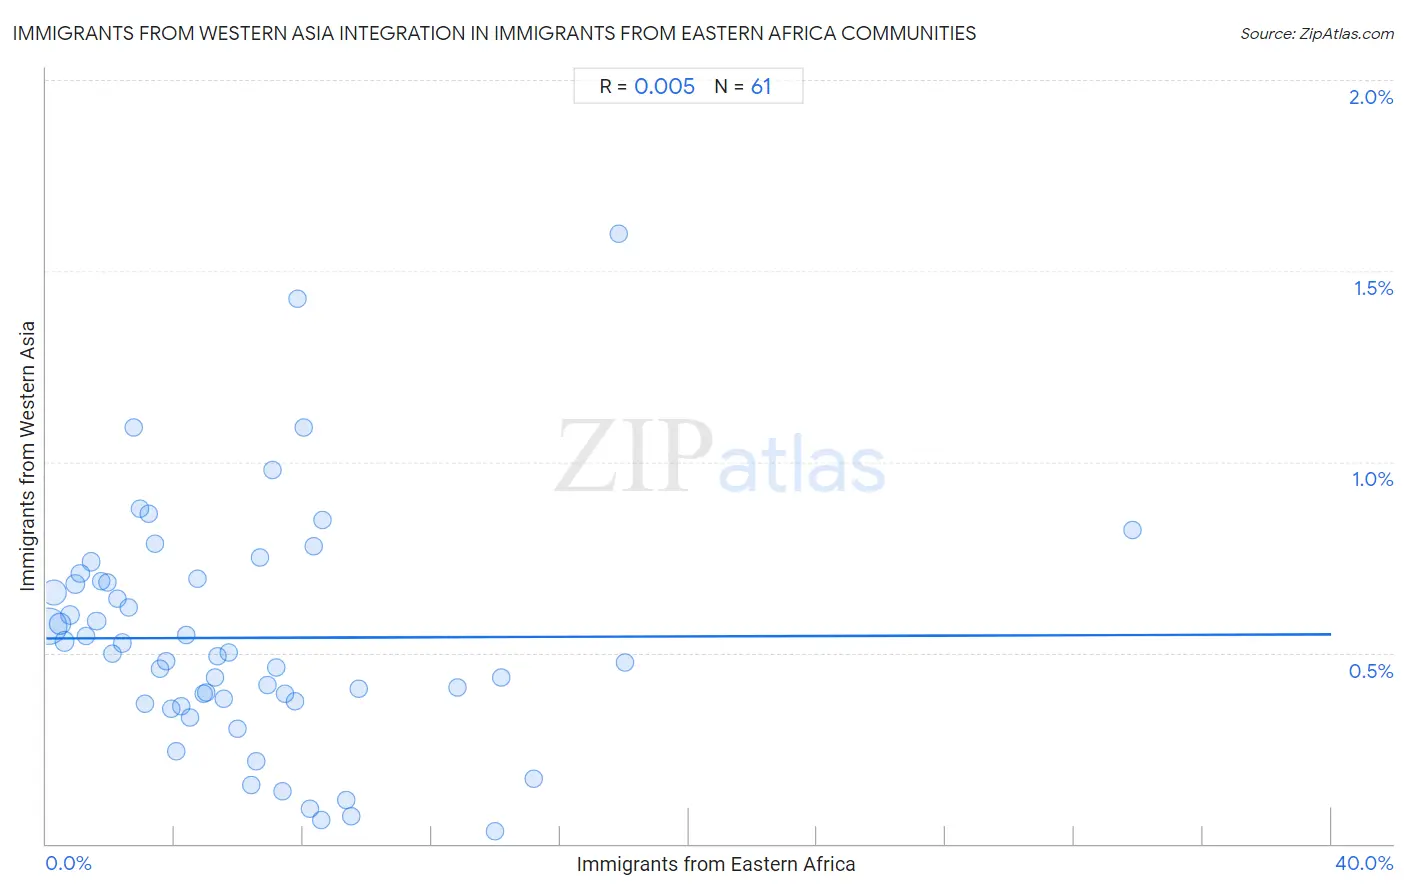 Immigrants from Eastern Africa Integration in Immigrants from Western Asia Communities